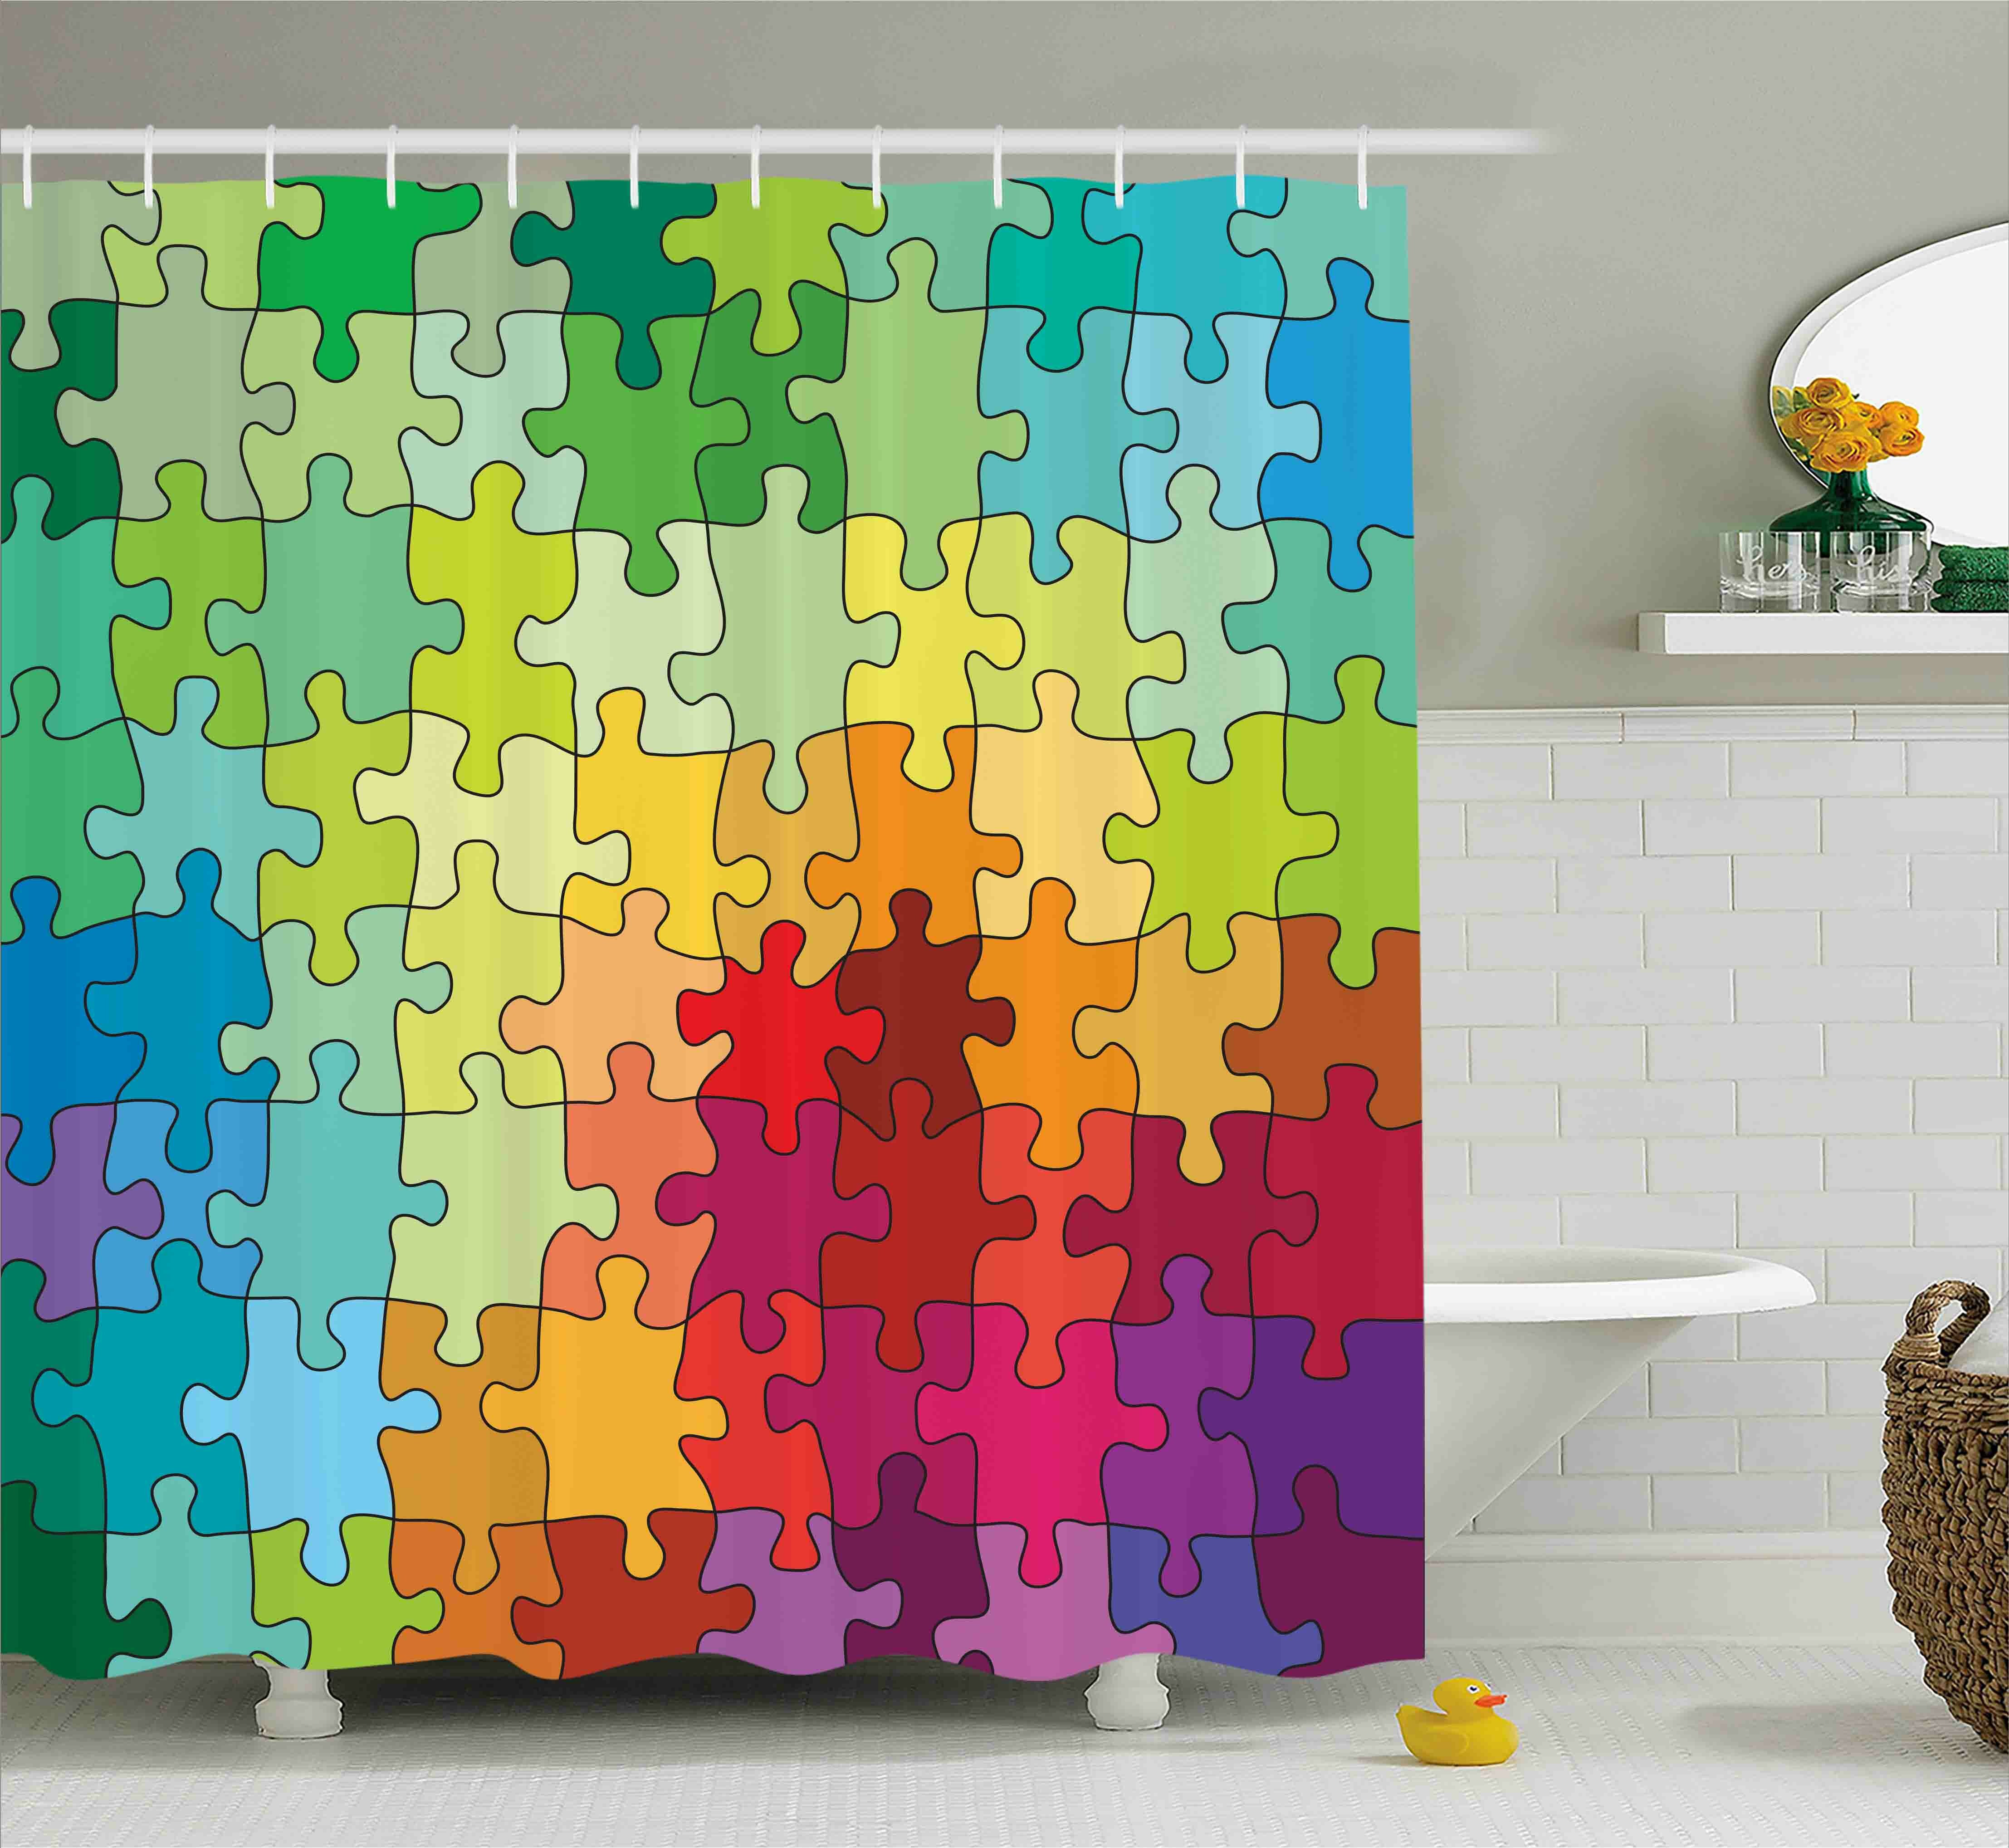 Ebern Designs Angelica Abstract Colorful Puzzle Pieces Fractal Children  Hobby Activity Leisure Toys Cartoon Image Single Shower Curtain | Wayfair